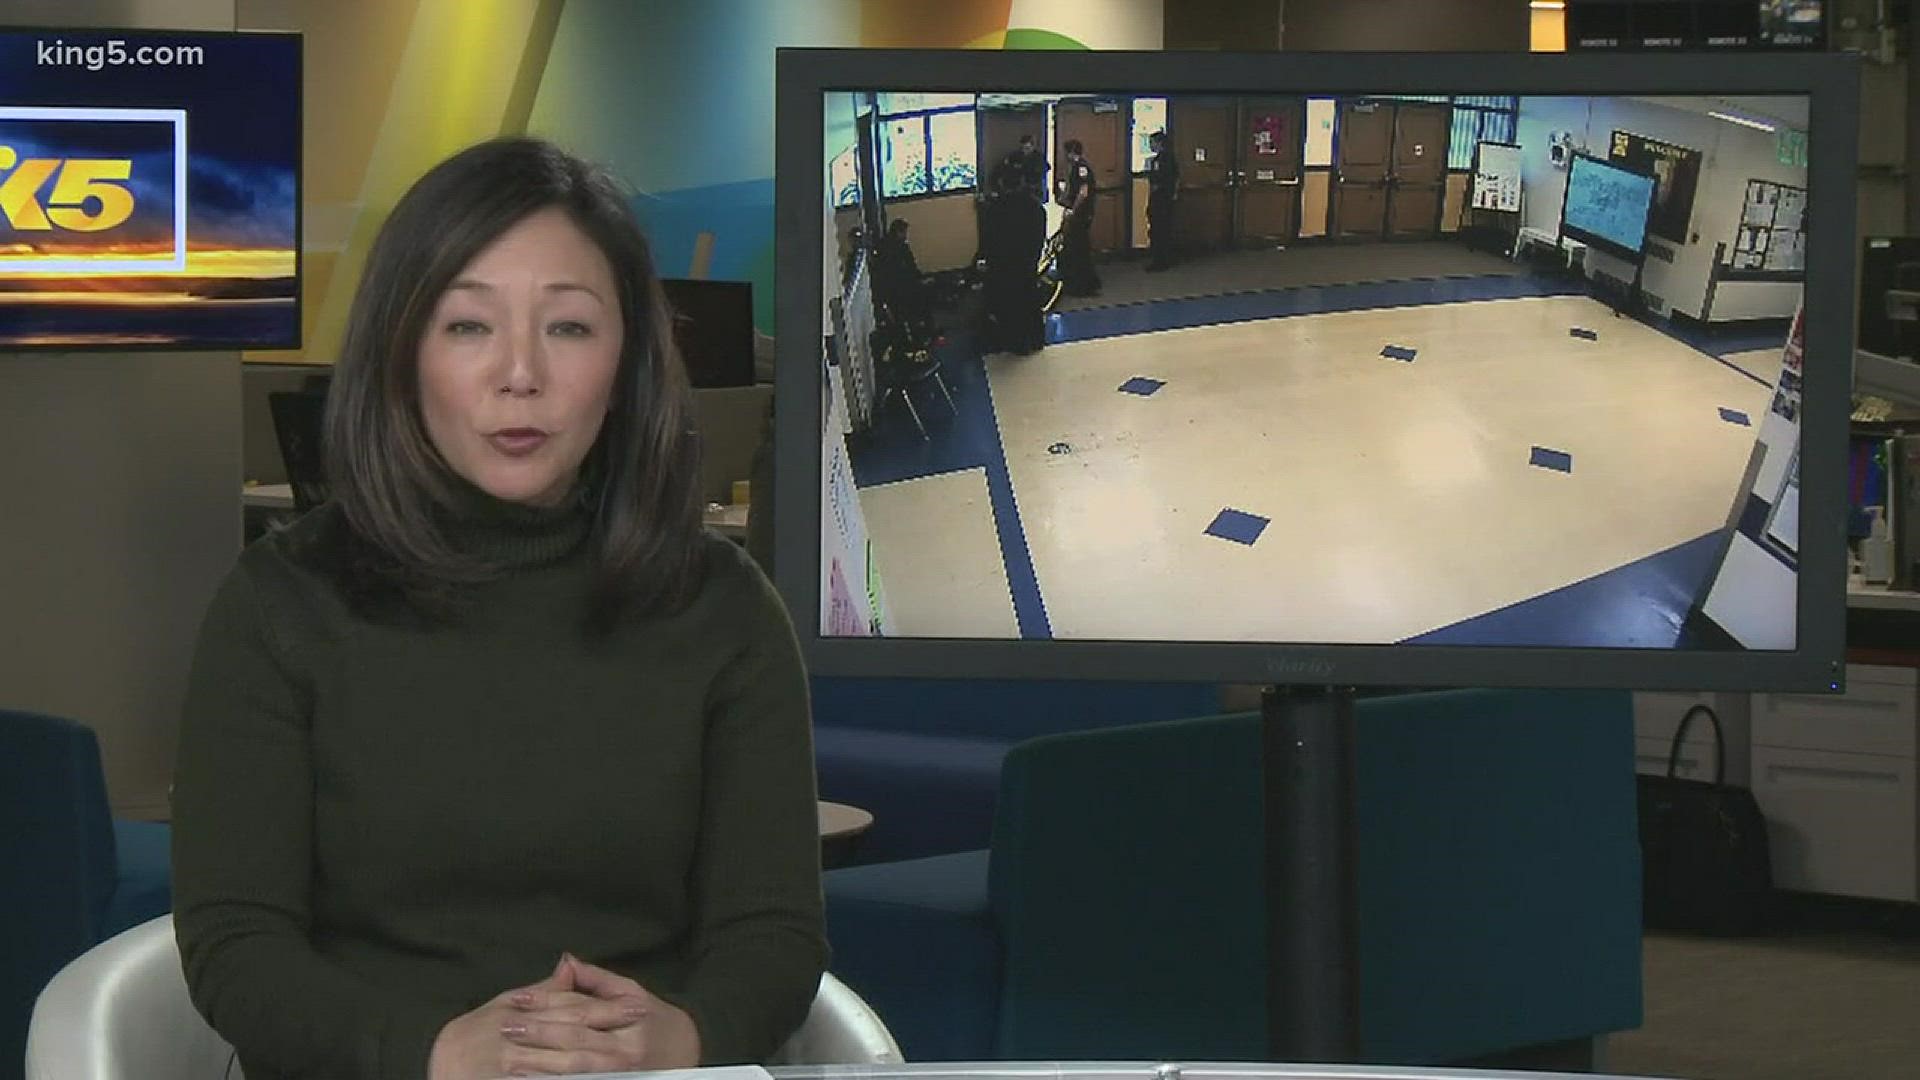 KING 5's Elisa Hahn reports.  We have blurred the guard's face because there has been no official determination he violated policy. The boy's mother gave permission to show her son.